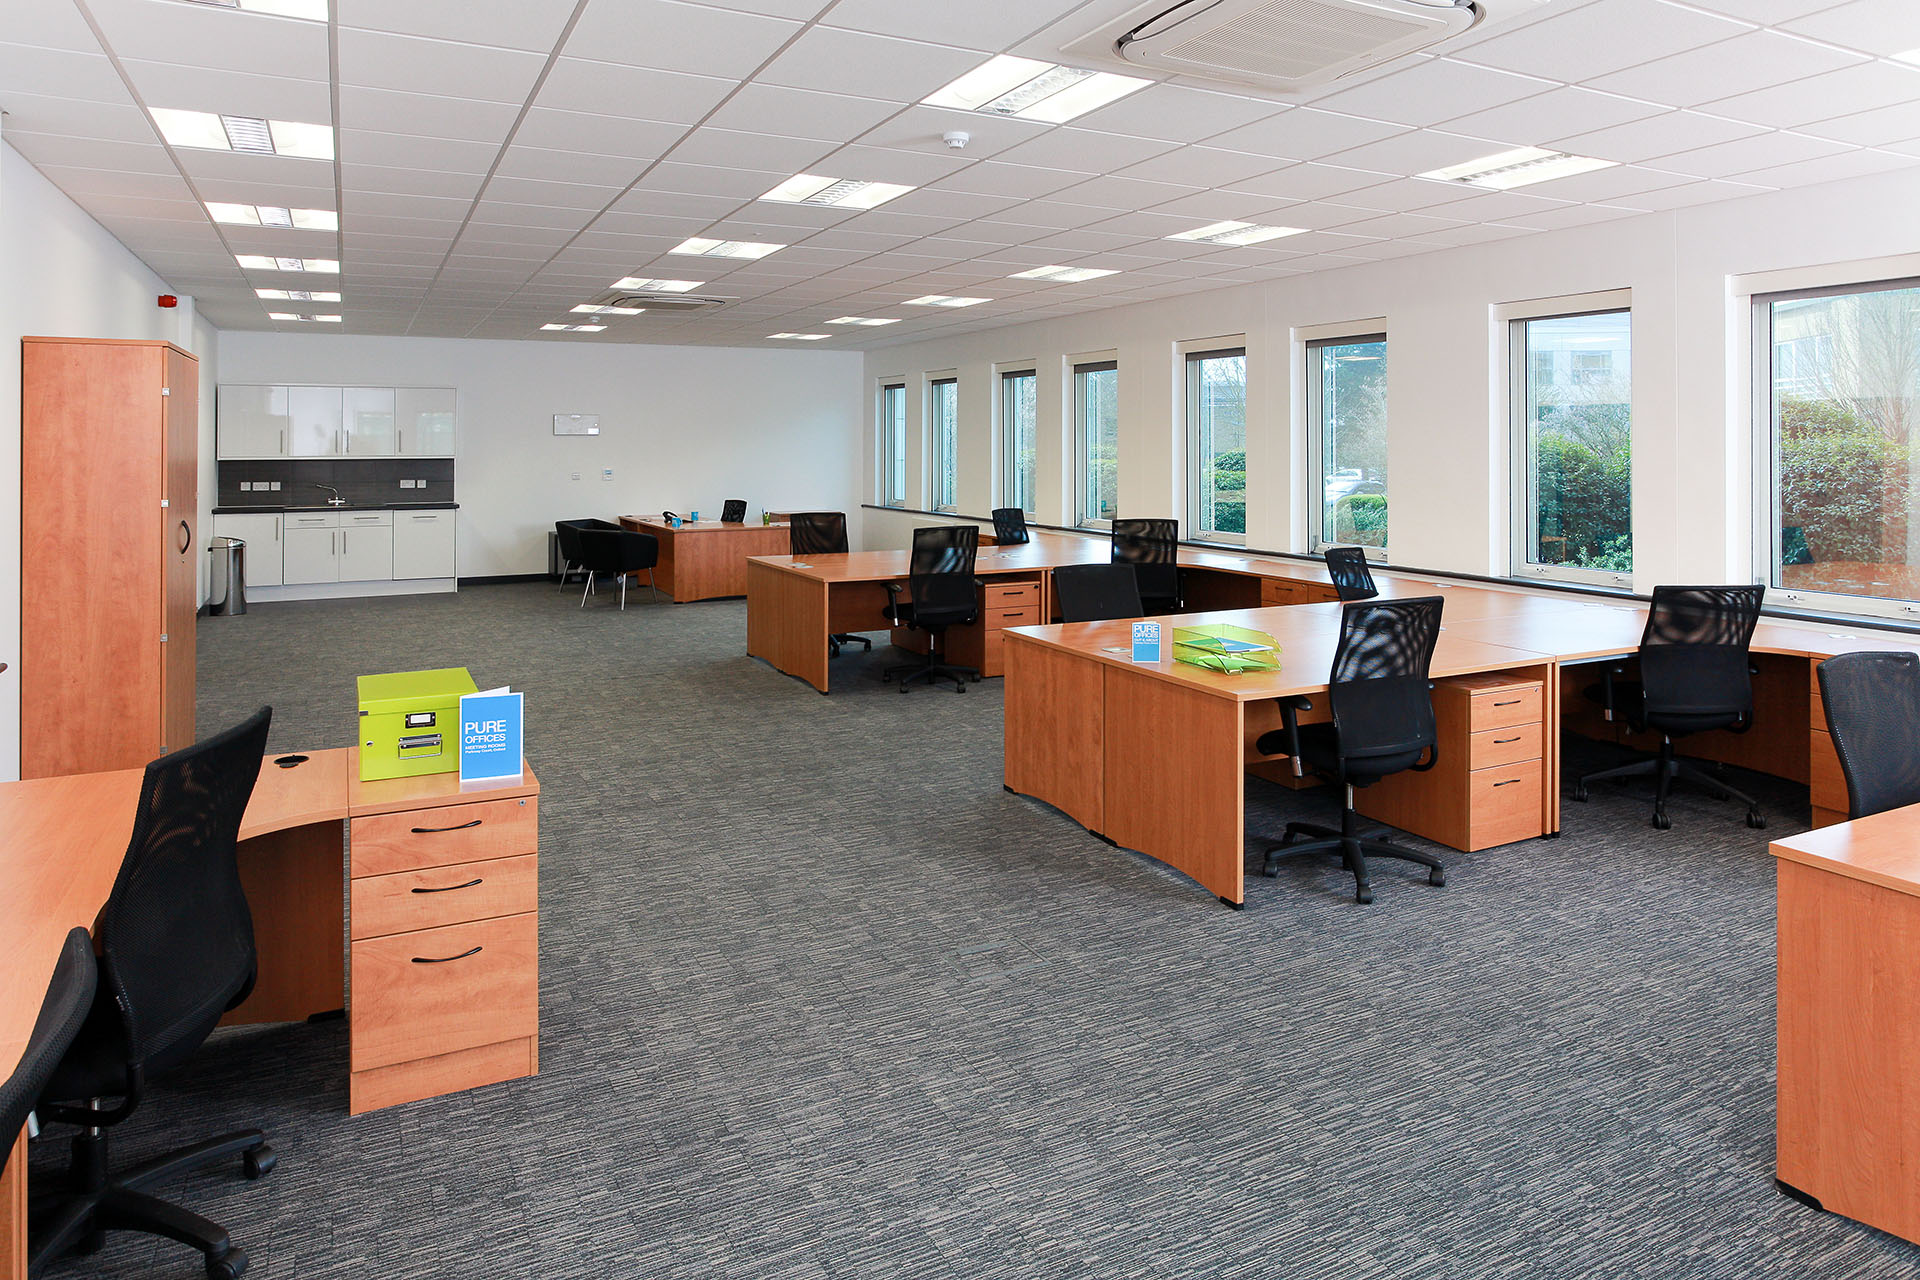 Offices to Rent in Oxford | Office Space | Pure Offices